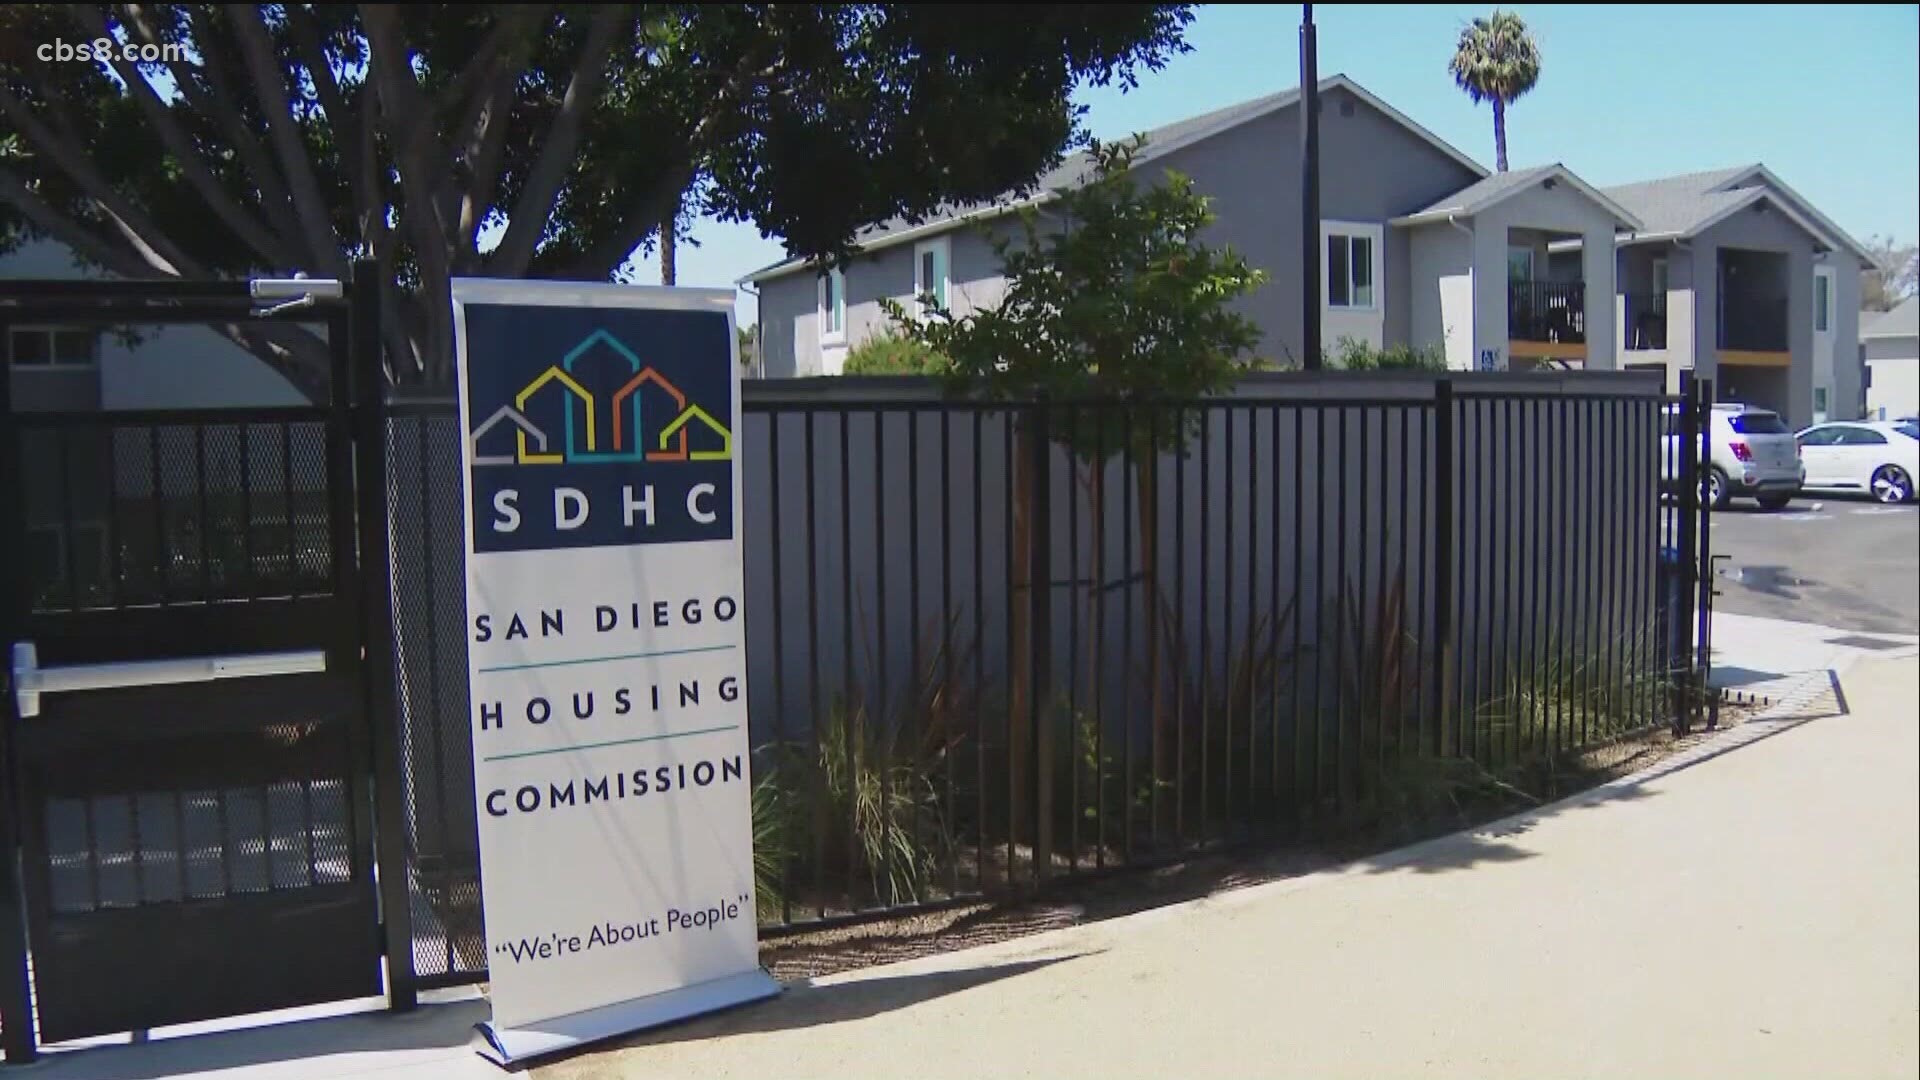 The Legal Aid Society of San Diego and other nonprofit organizations have pooled resources and help under one roof, called Housing Help SD.